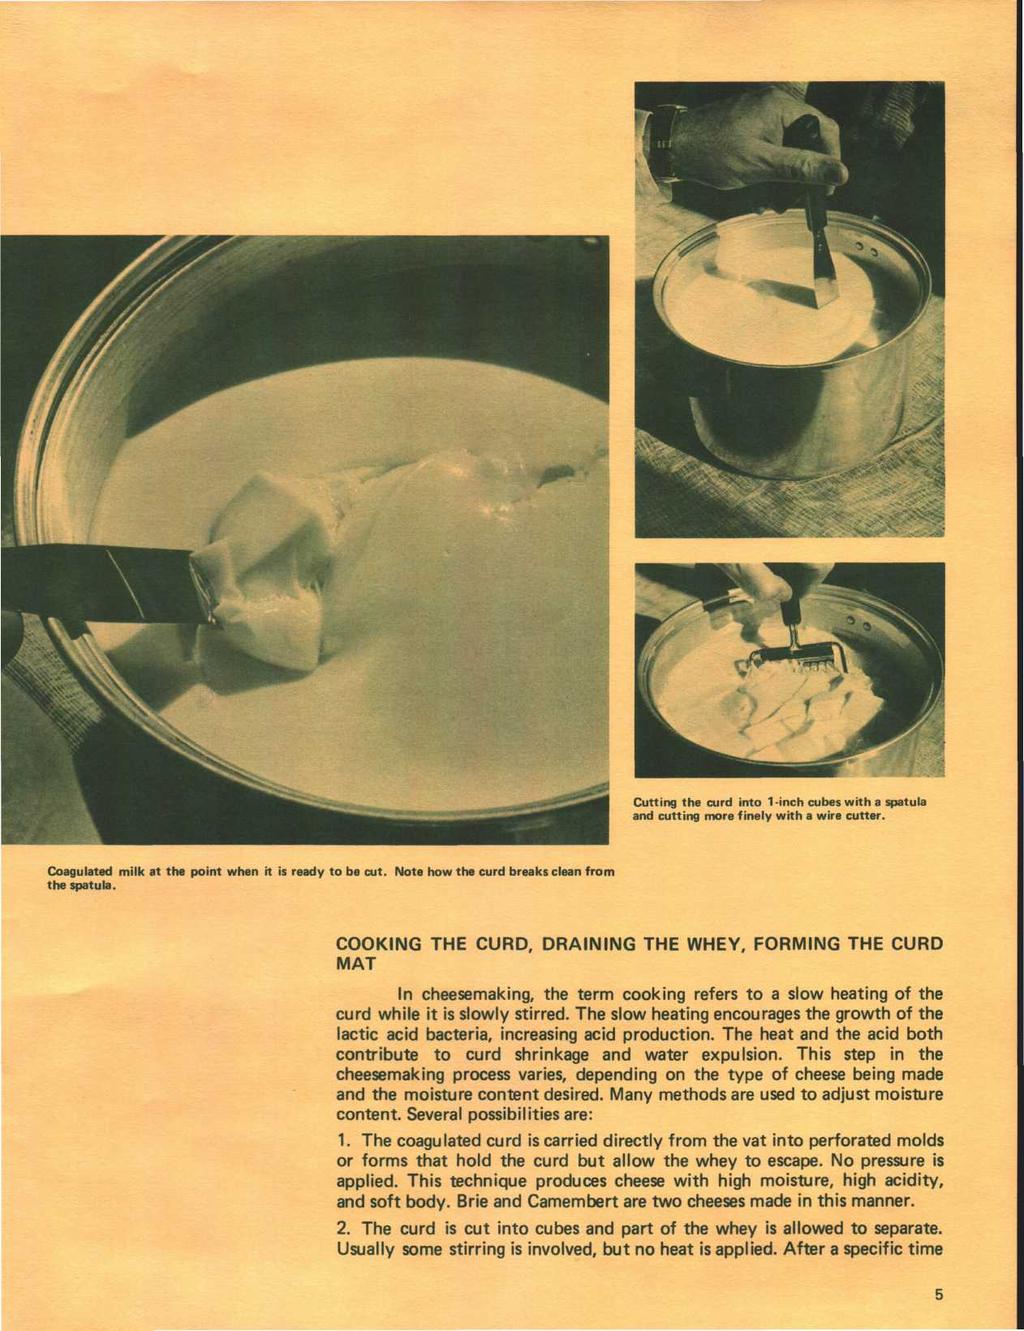 Cutting the curd into 1-inch cubes with a spatula and cutting more finely with a wire cutter. Coagulated milk at the point when it is ready to be cut. Note how the curd breaks clean from the spatula.